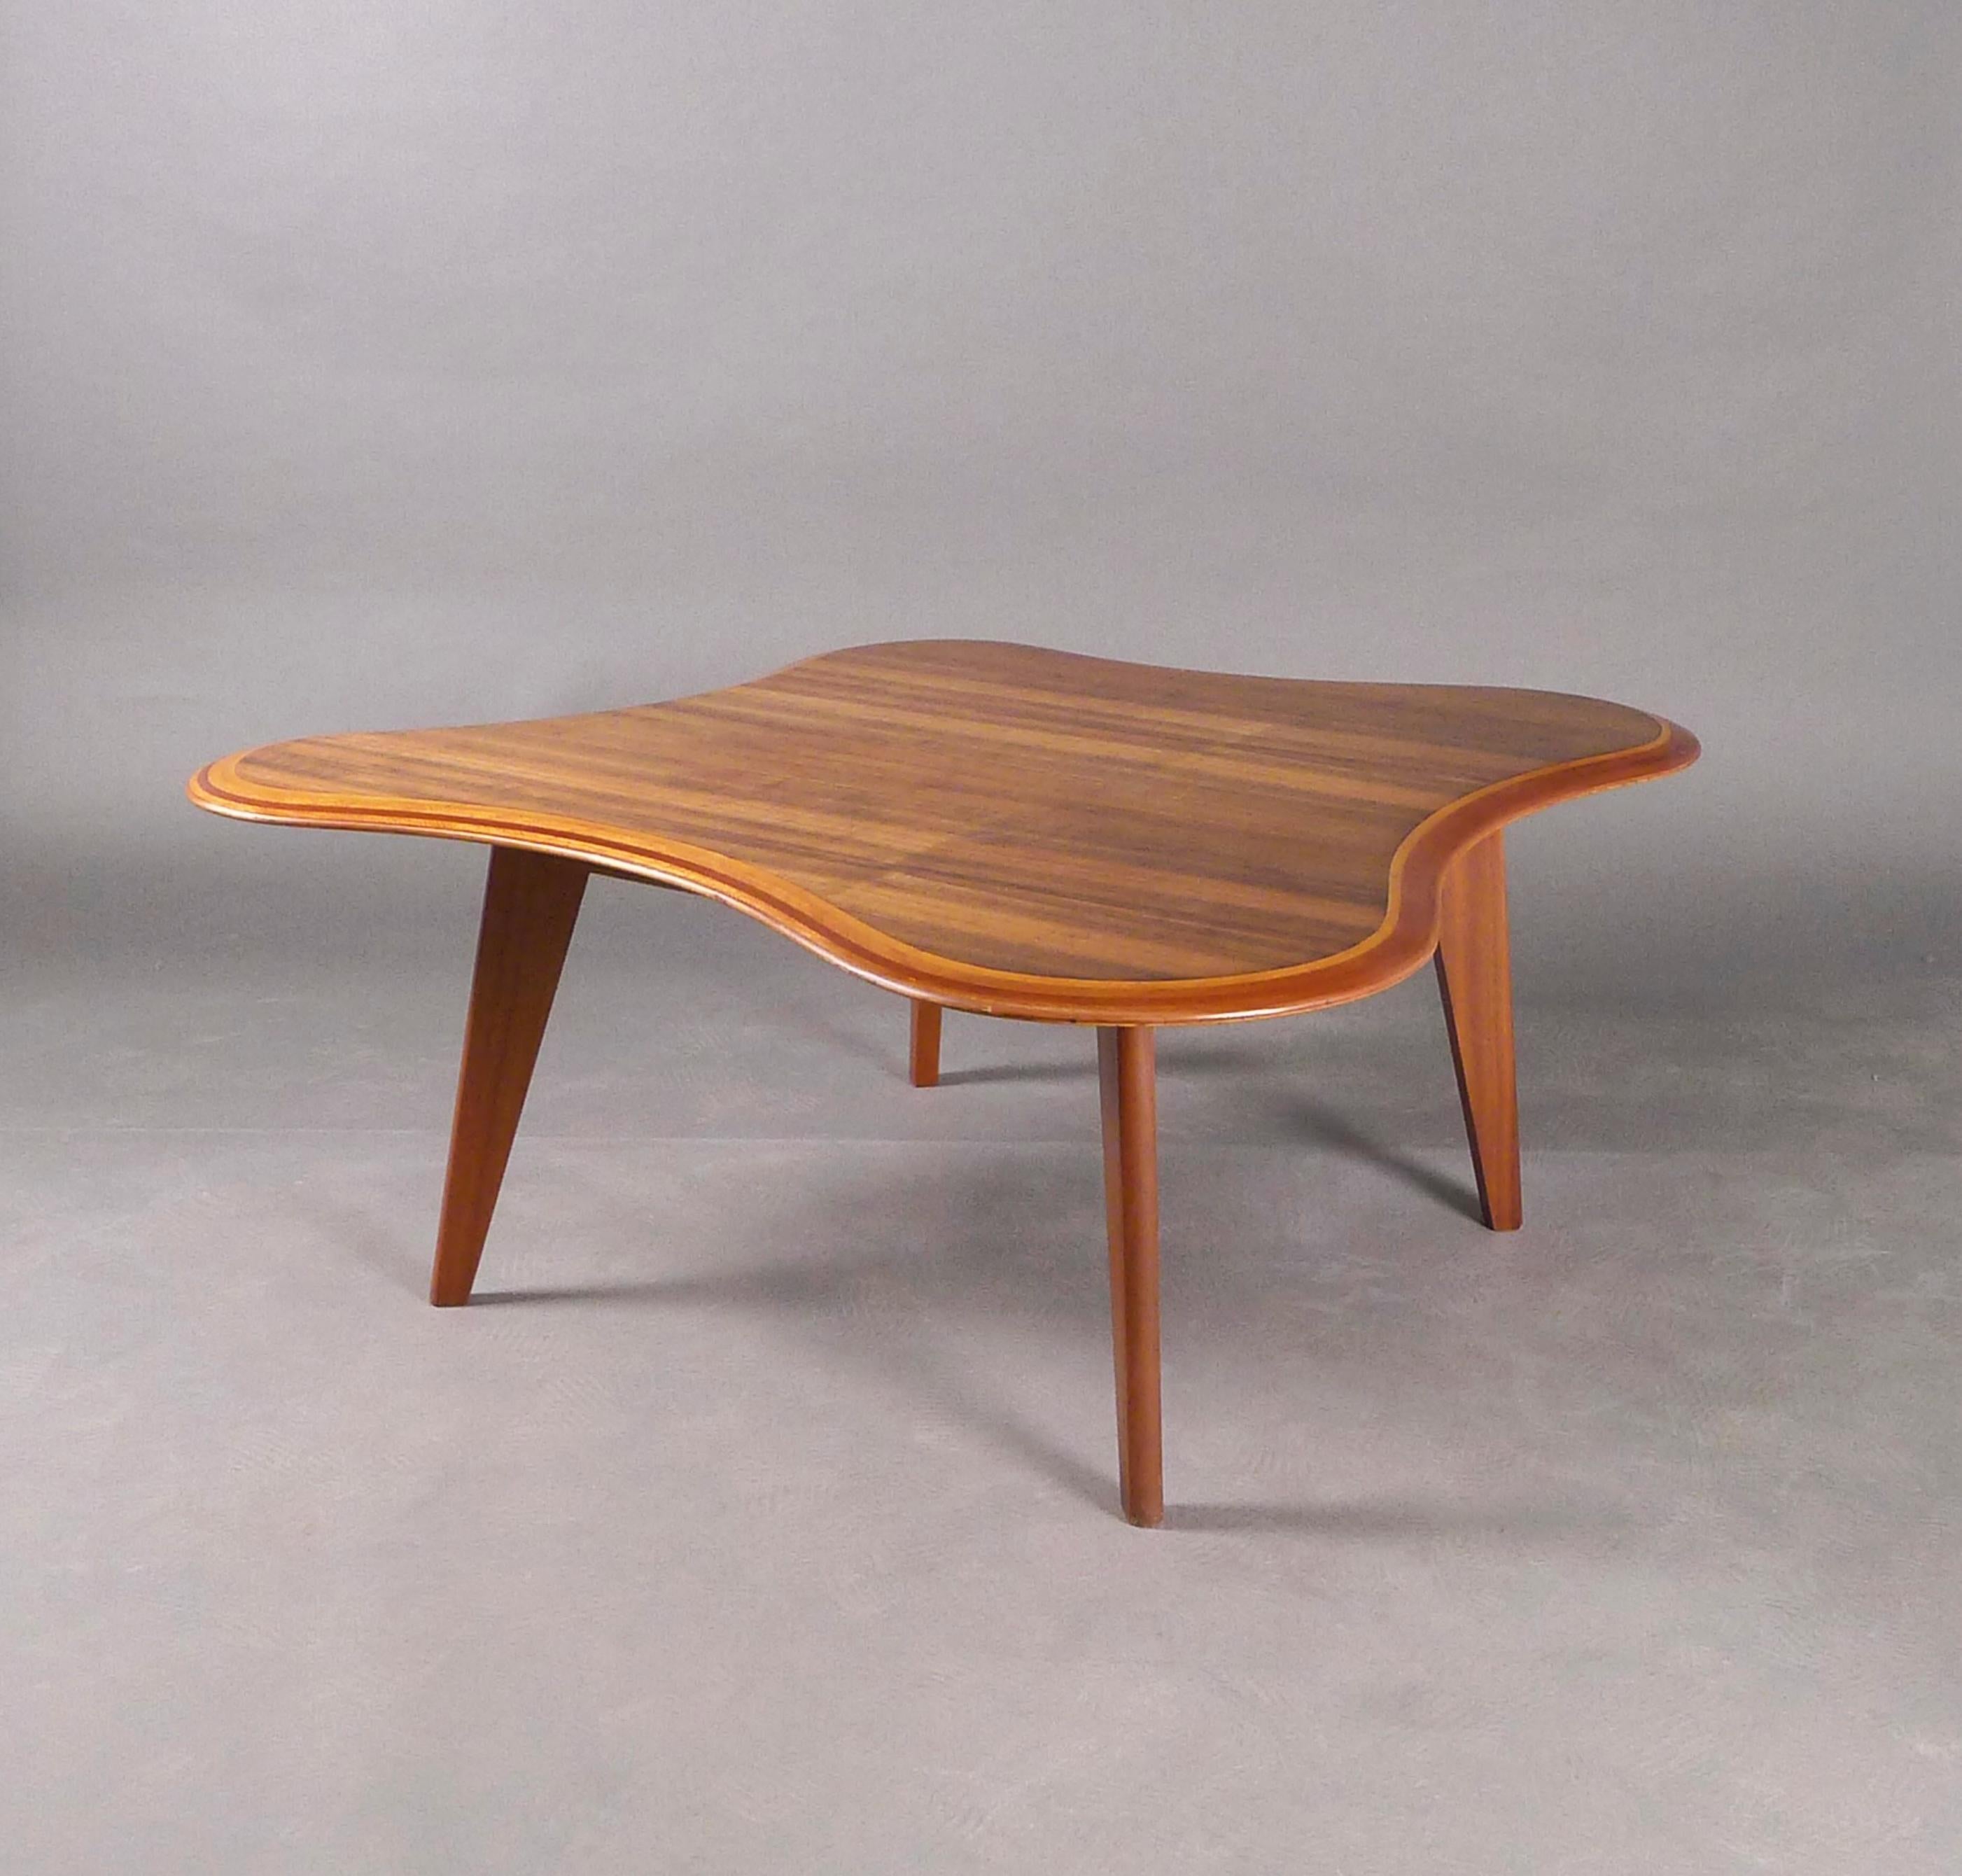 Stunning mid-century Cloud Table, designed by Neil Morris in 1947 and made by H. Morris & Co, Glasgow.

The rosewood and betula laminates have been chamfered to create contrasting border stripes around the irregular shaped edge.  The top has a